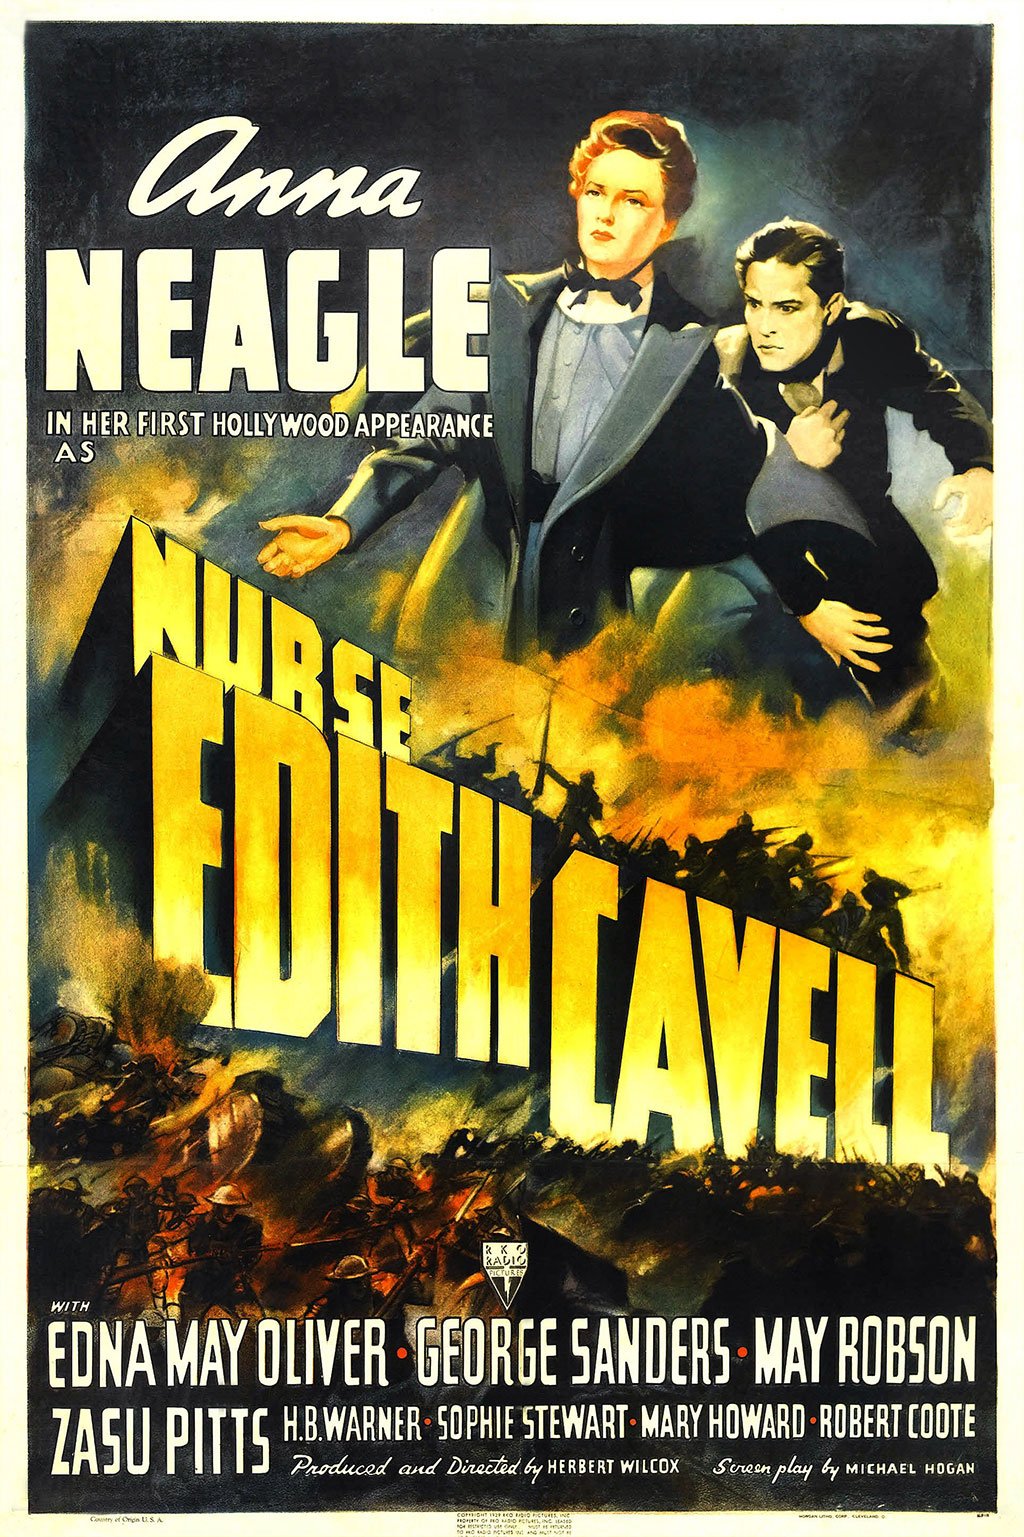 A dynamic, illustrated colour poster, with a battlefield and fire in the background, for Nurse Edith Cavell starring Anna Neagle